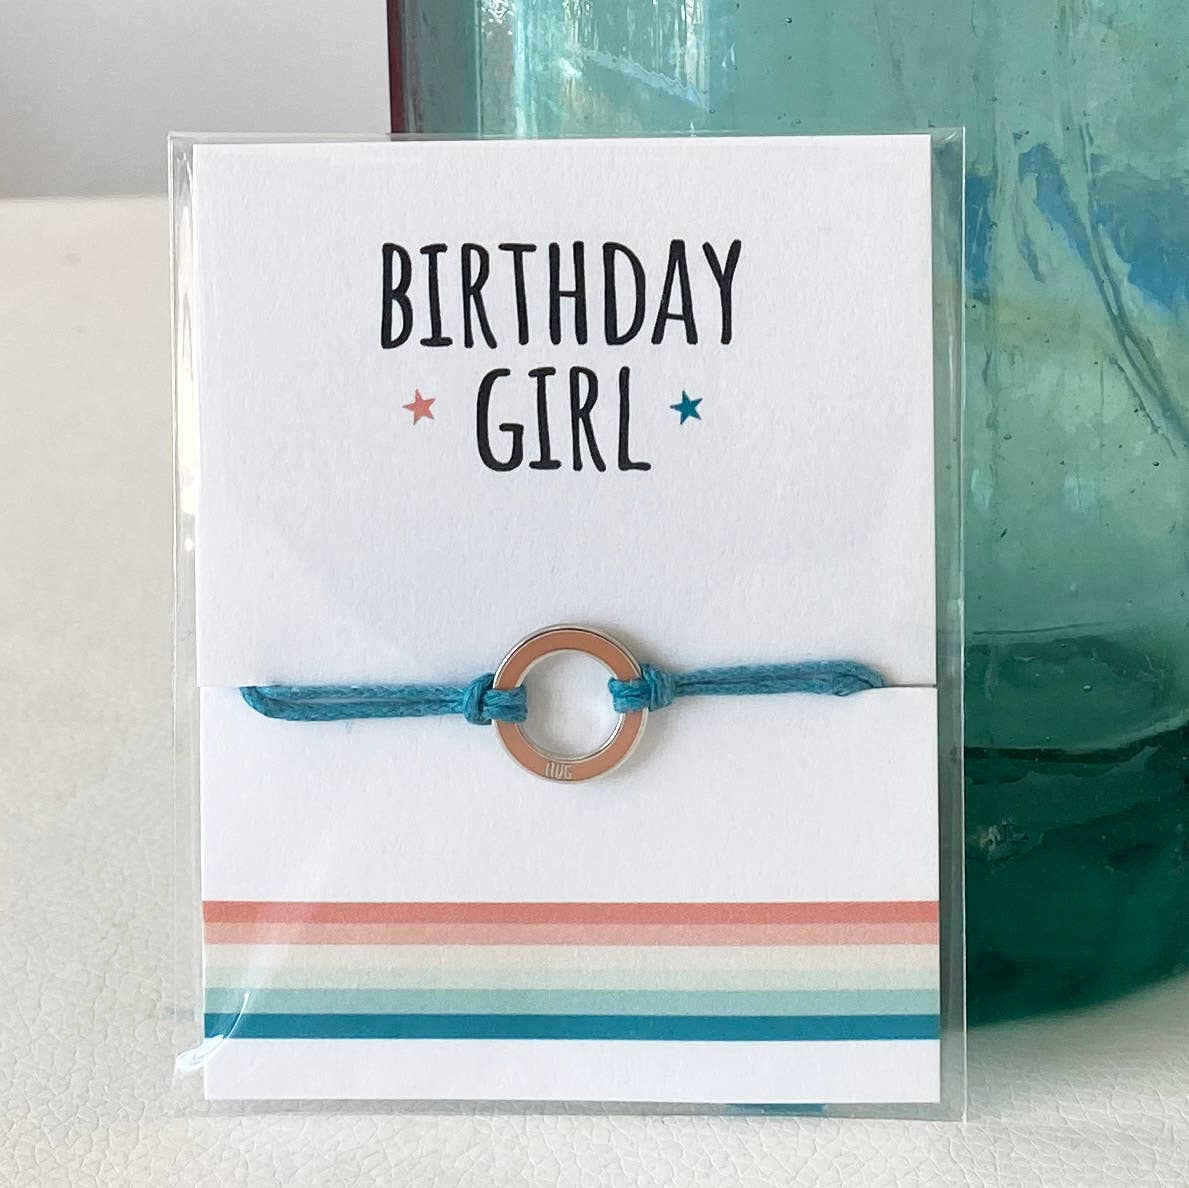 Coral and Mint - 'Birthday Girl' String Charm Bracelet.